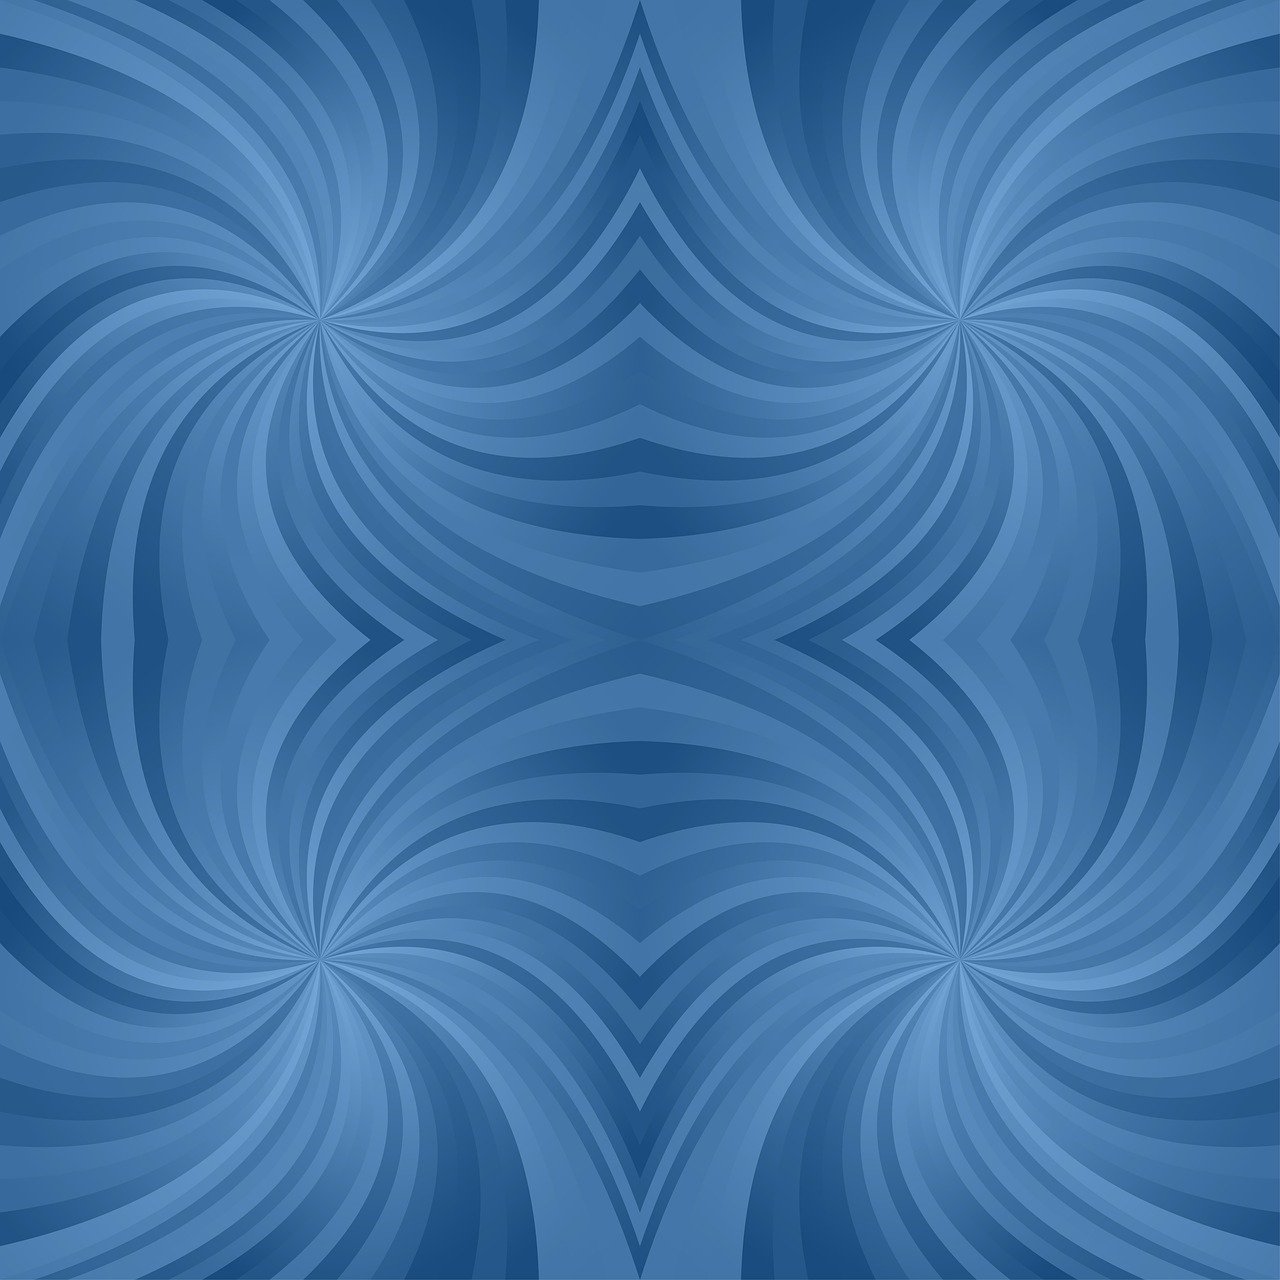 a blue background with swirly shapes, abstract illusionism, symmetry illustration